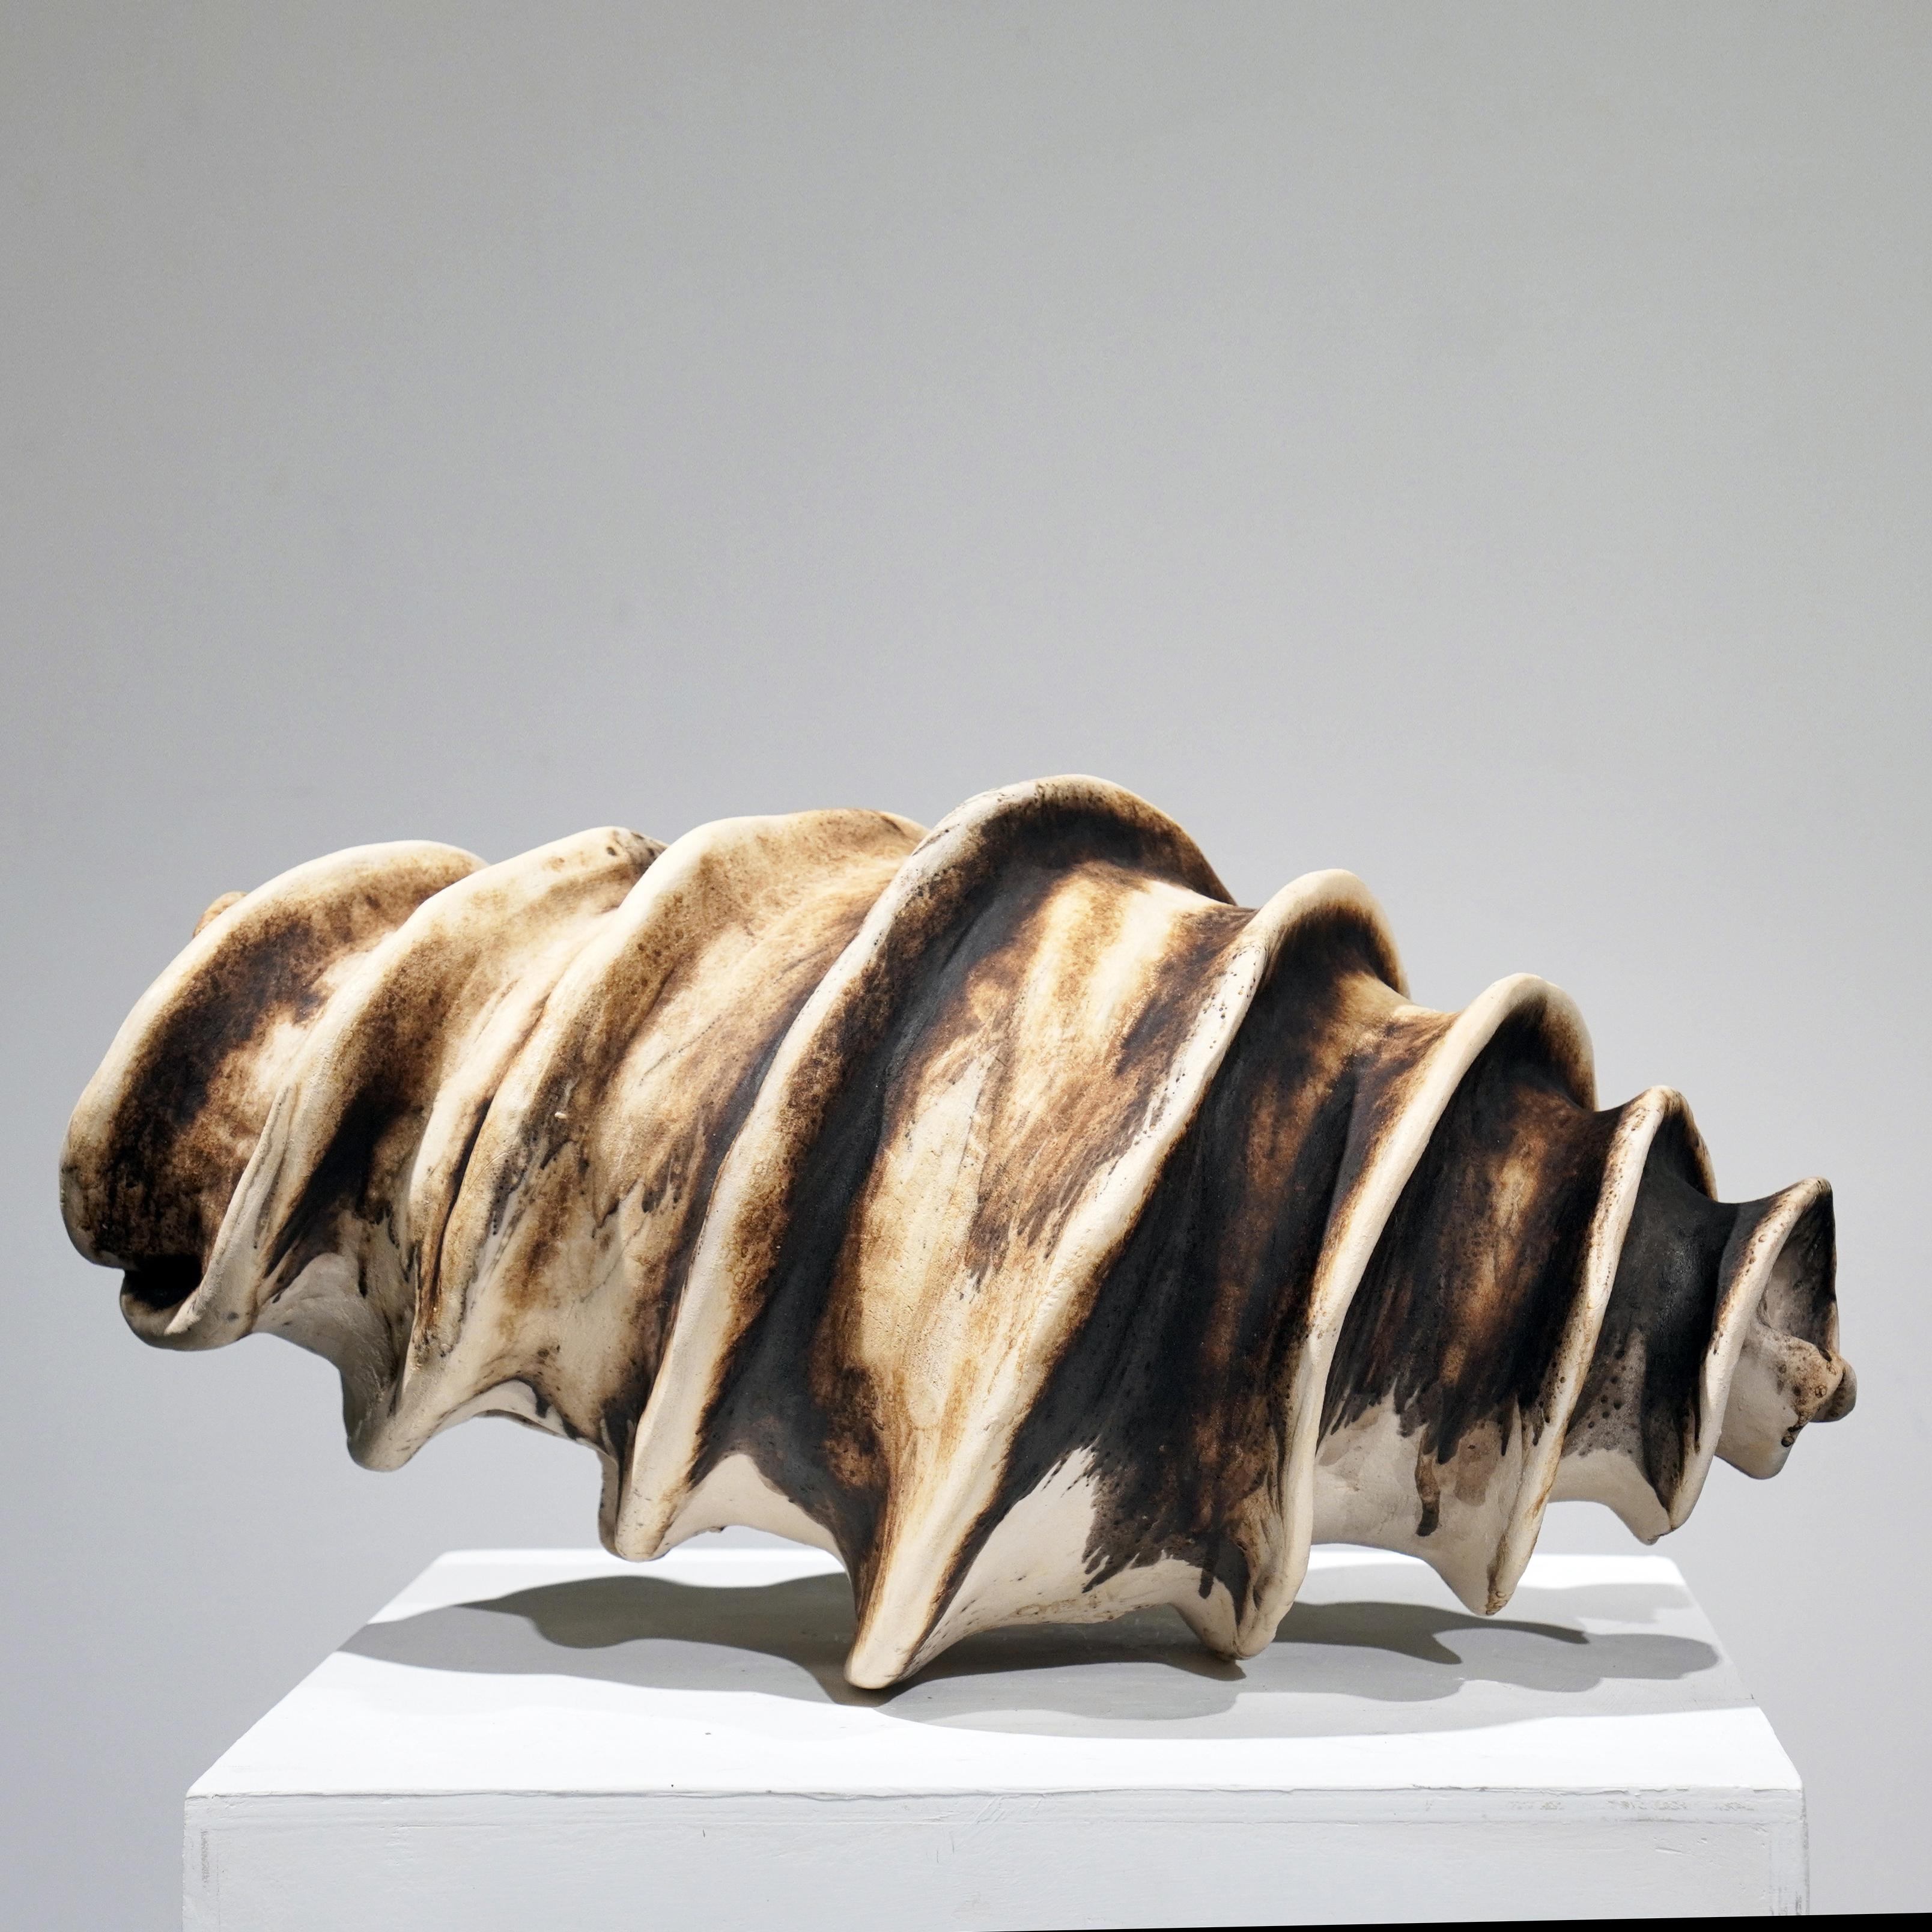 Fired Thoughts -life magnified collection raku ceramic pottery sculpture by Adil Ghani For Sale